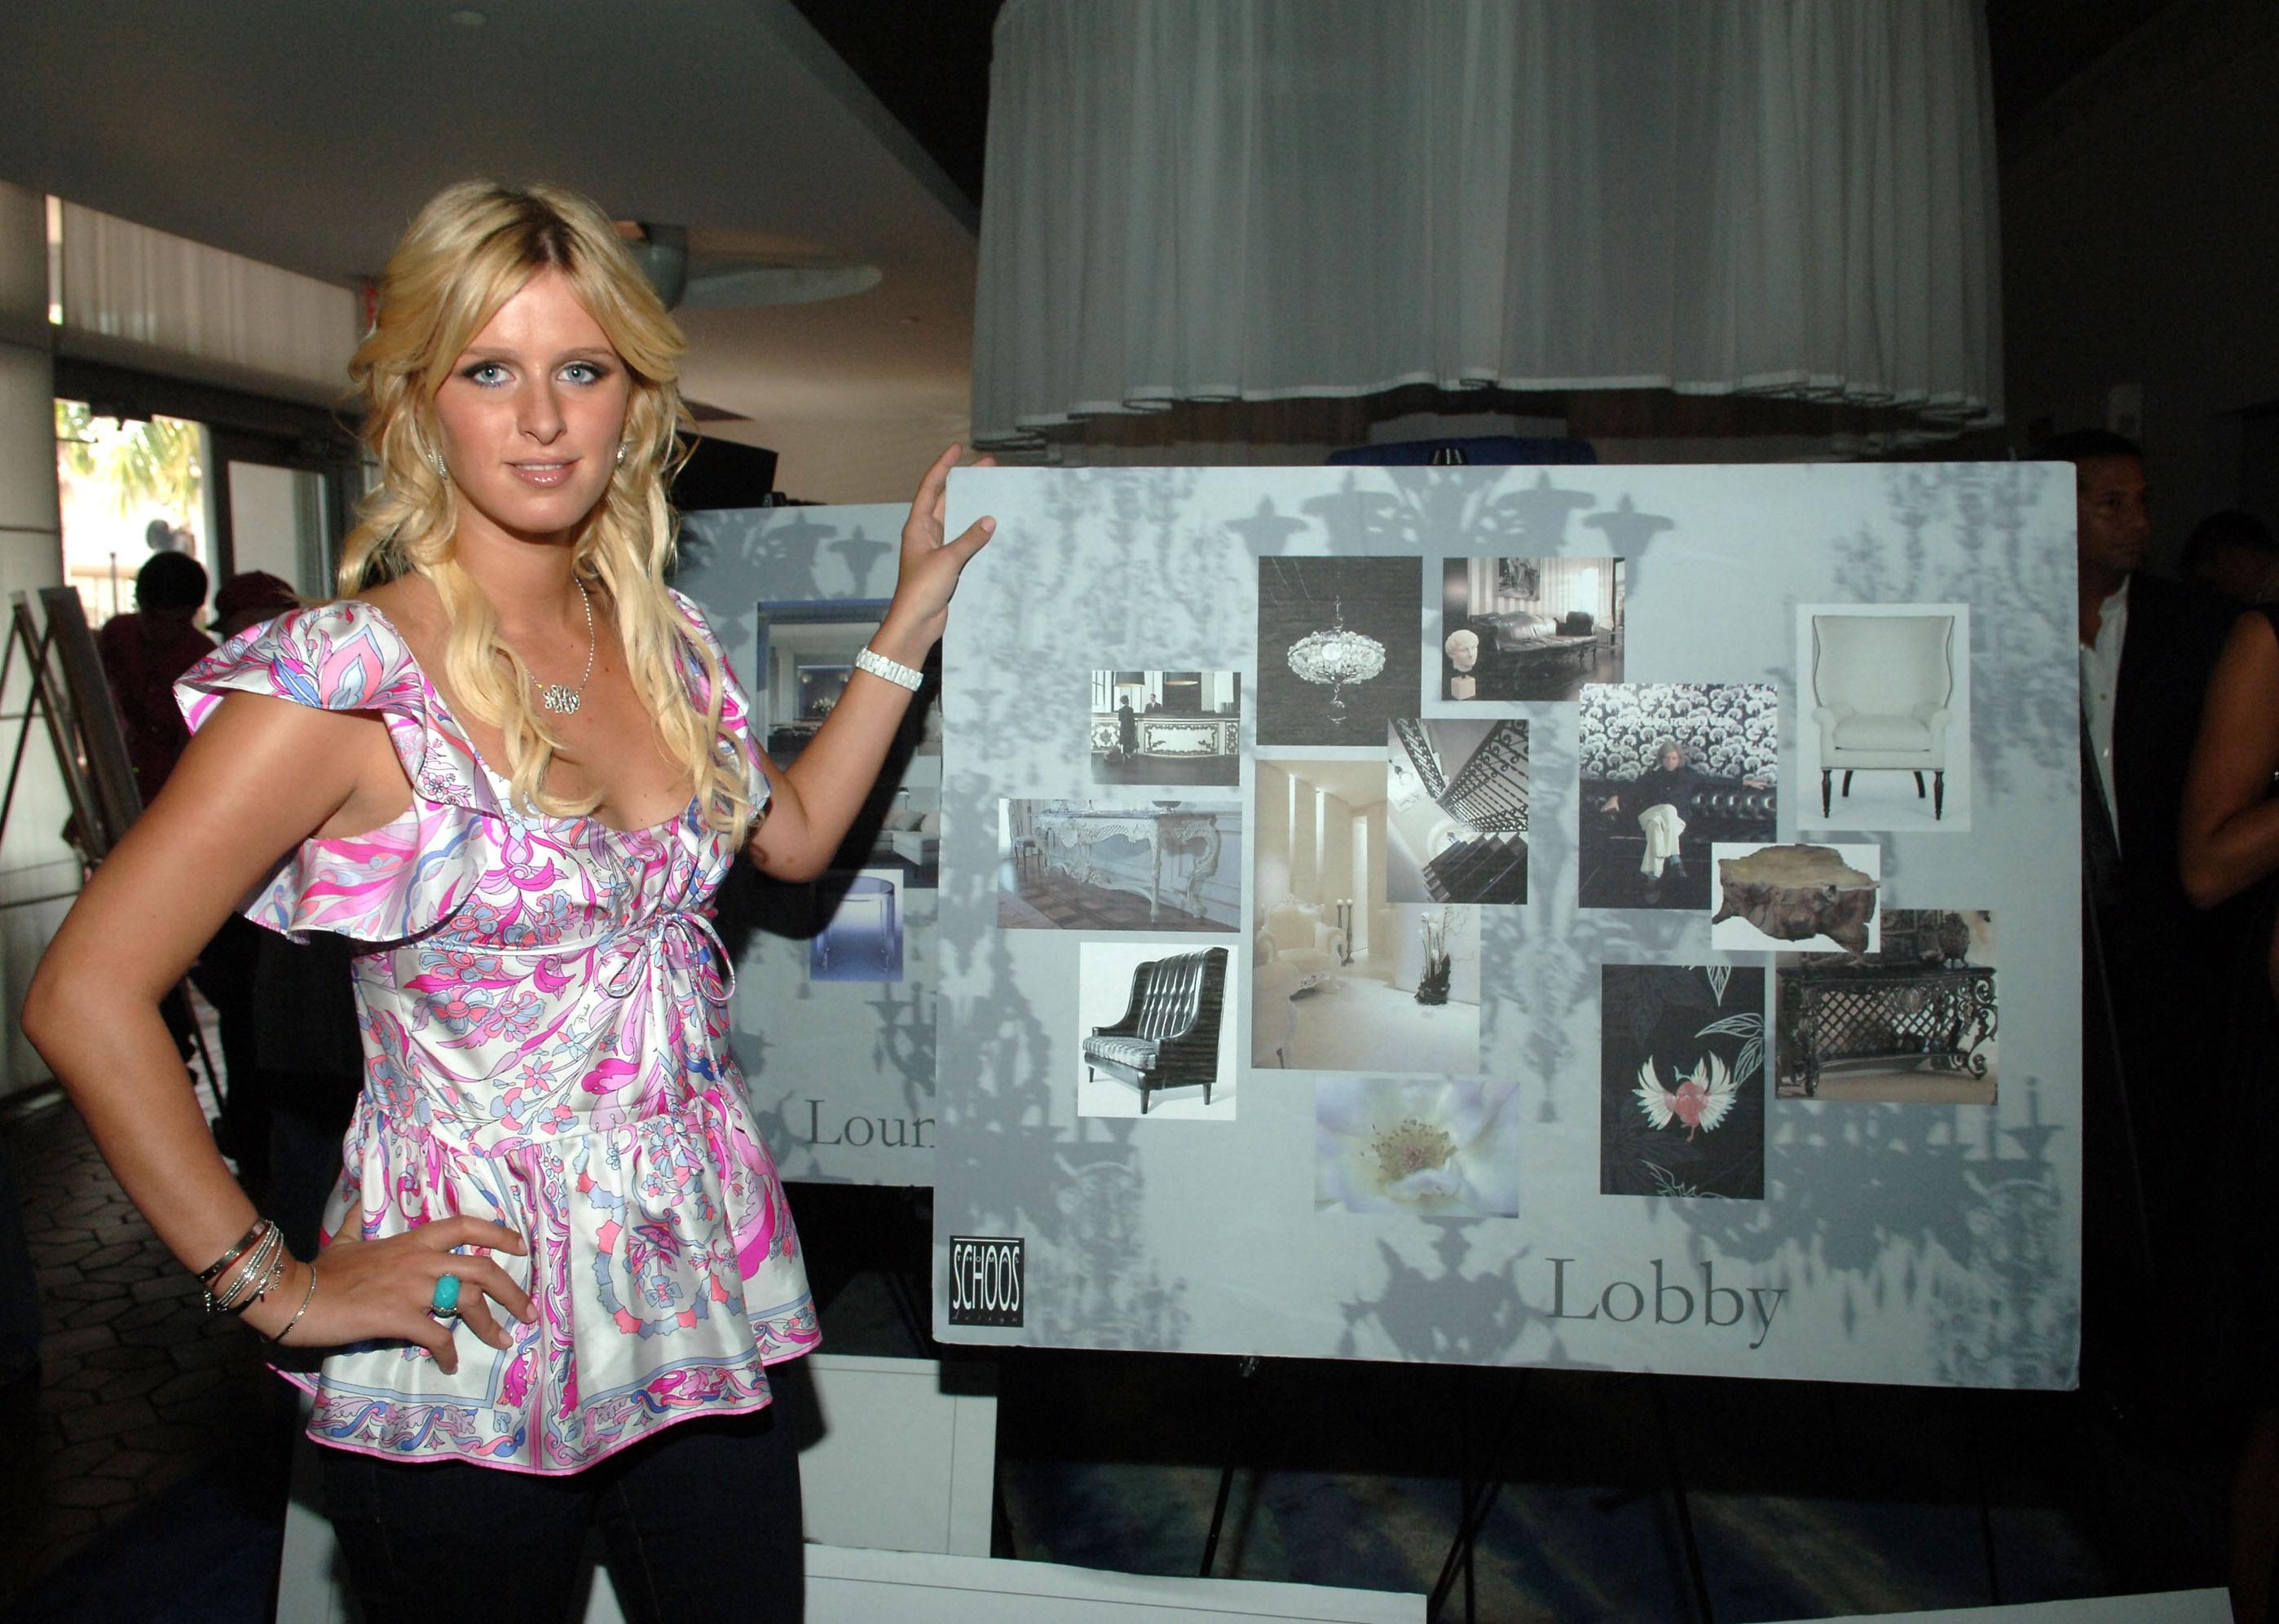 Nicky Hilton poses at the preview party for her South Beach hotel 'Nicky O.